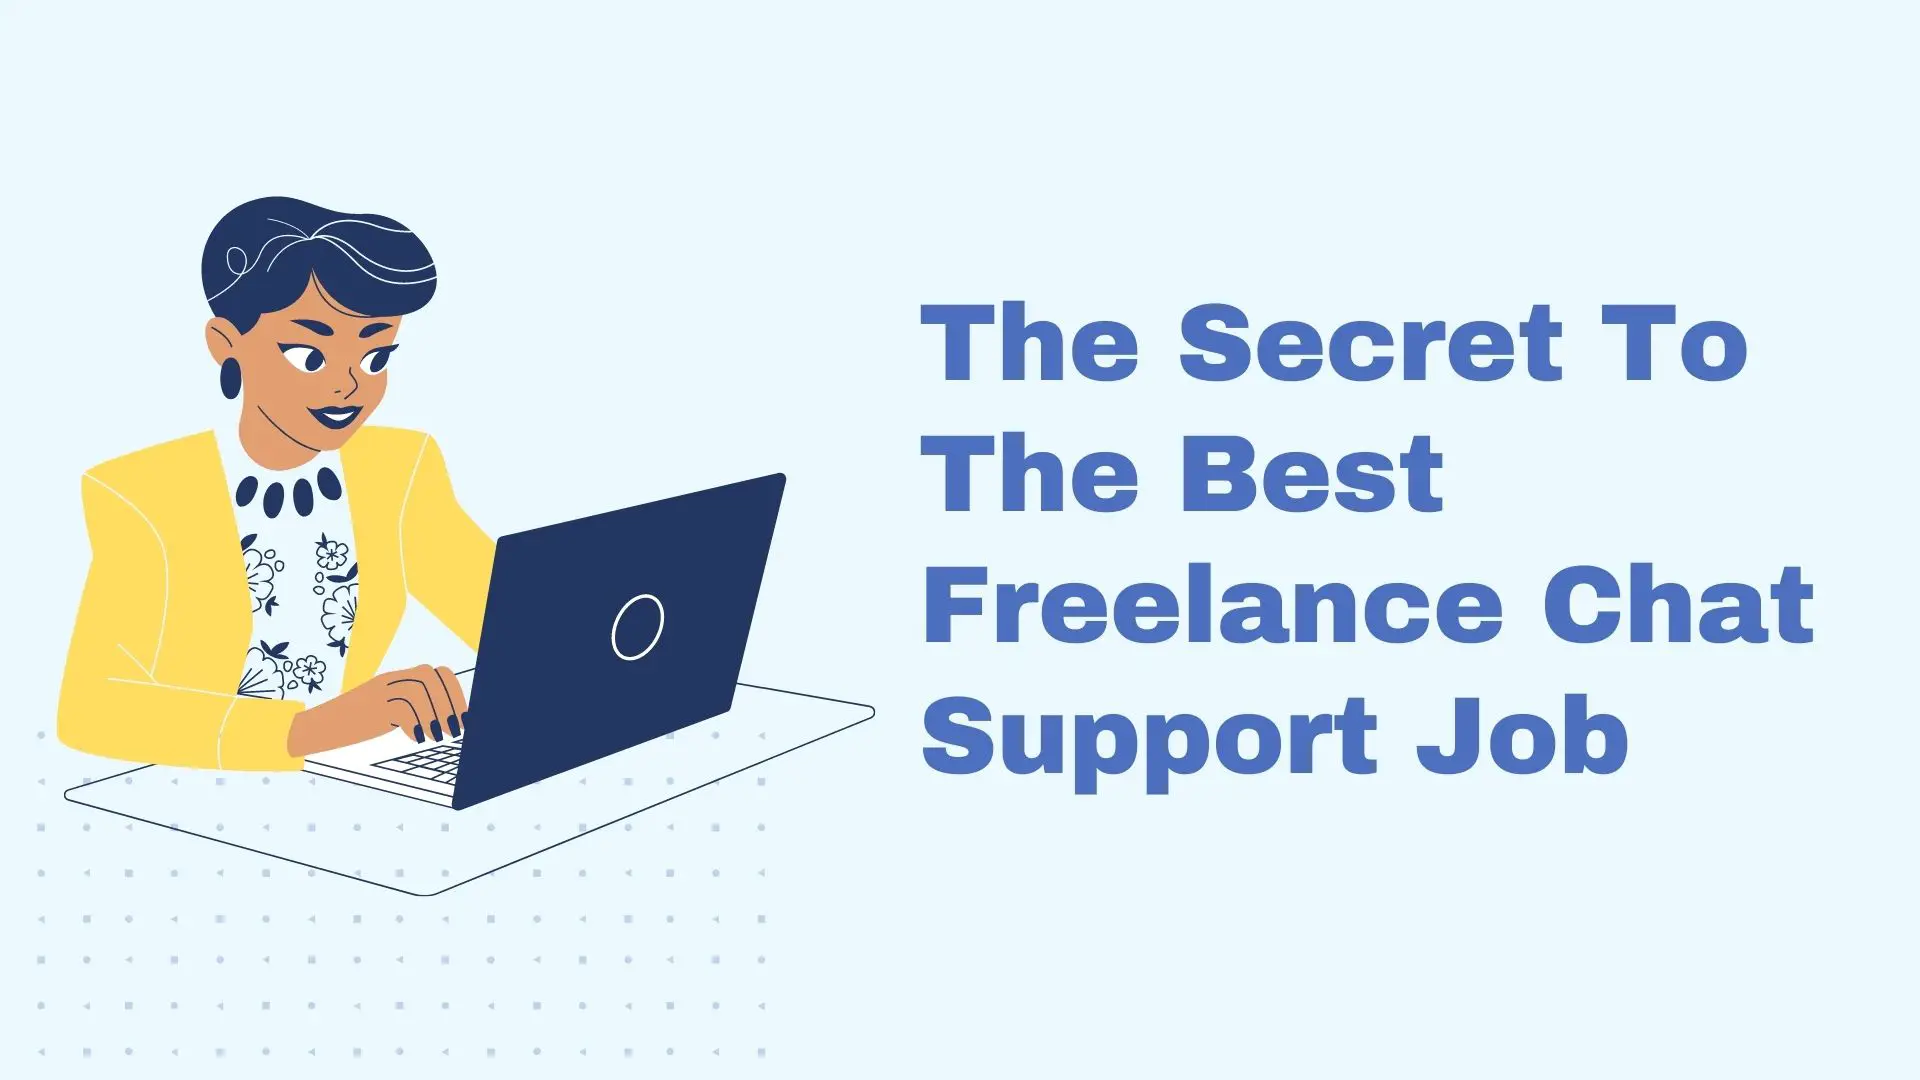 The Secret To The Best Freelance Chat Support Job